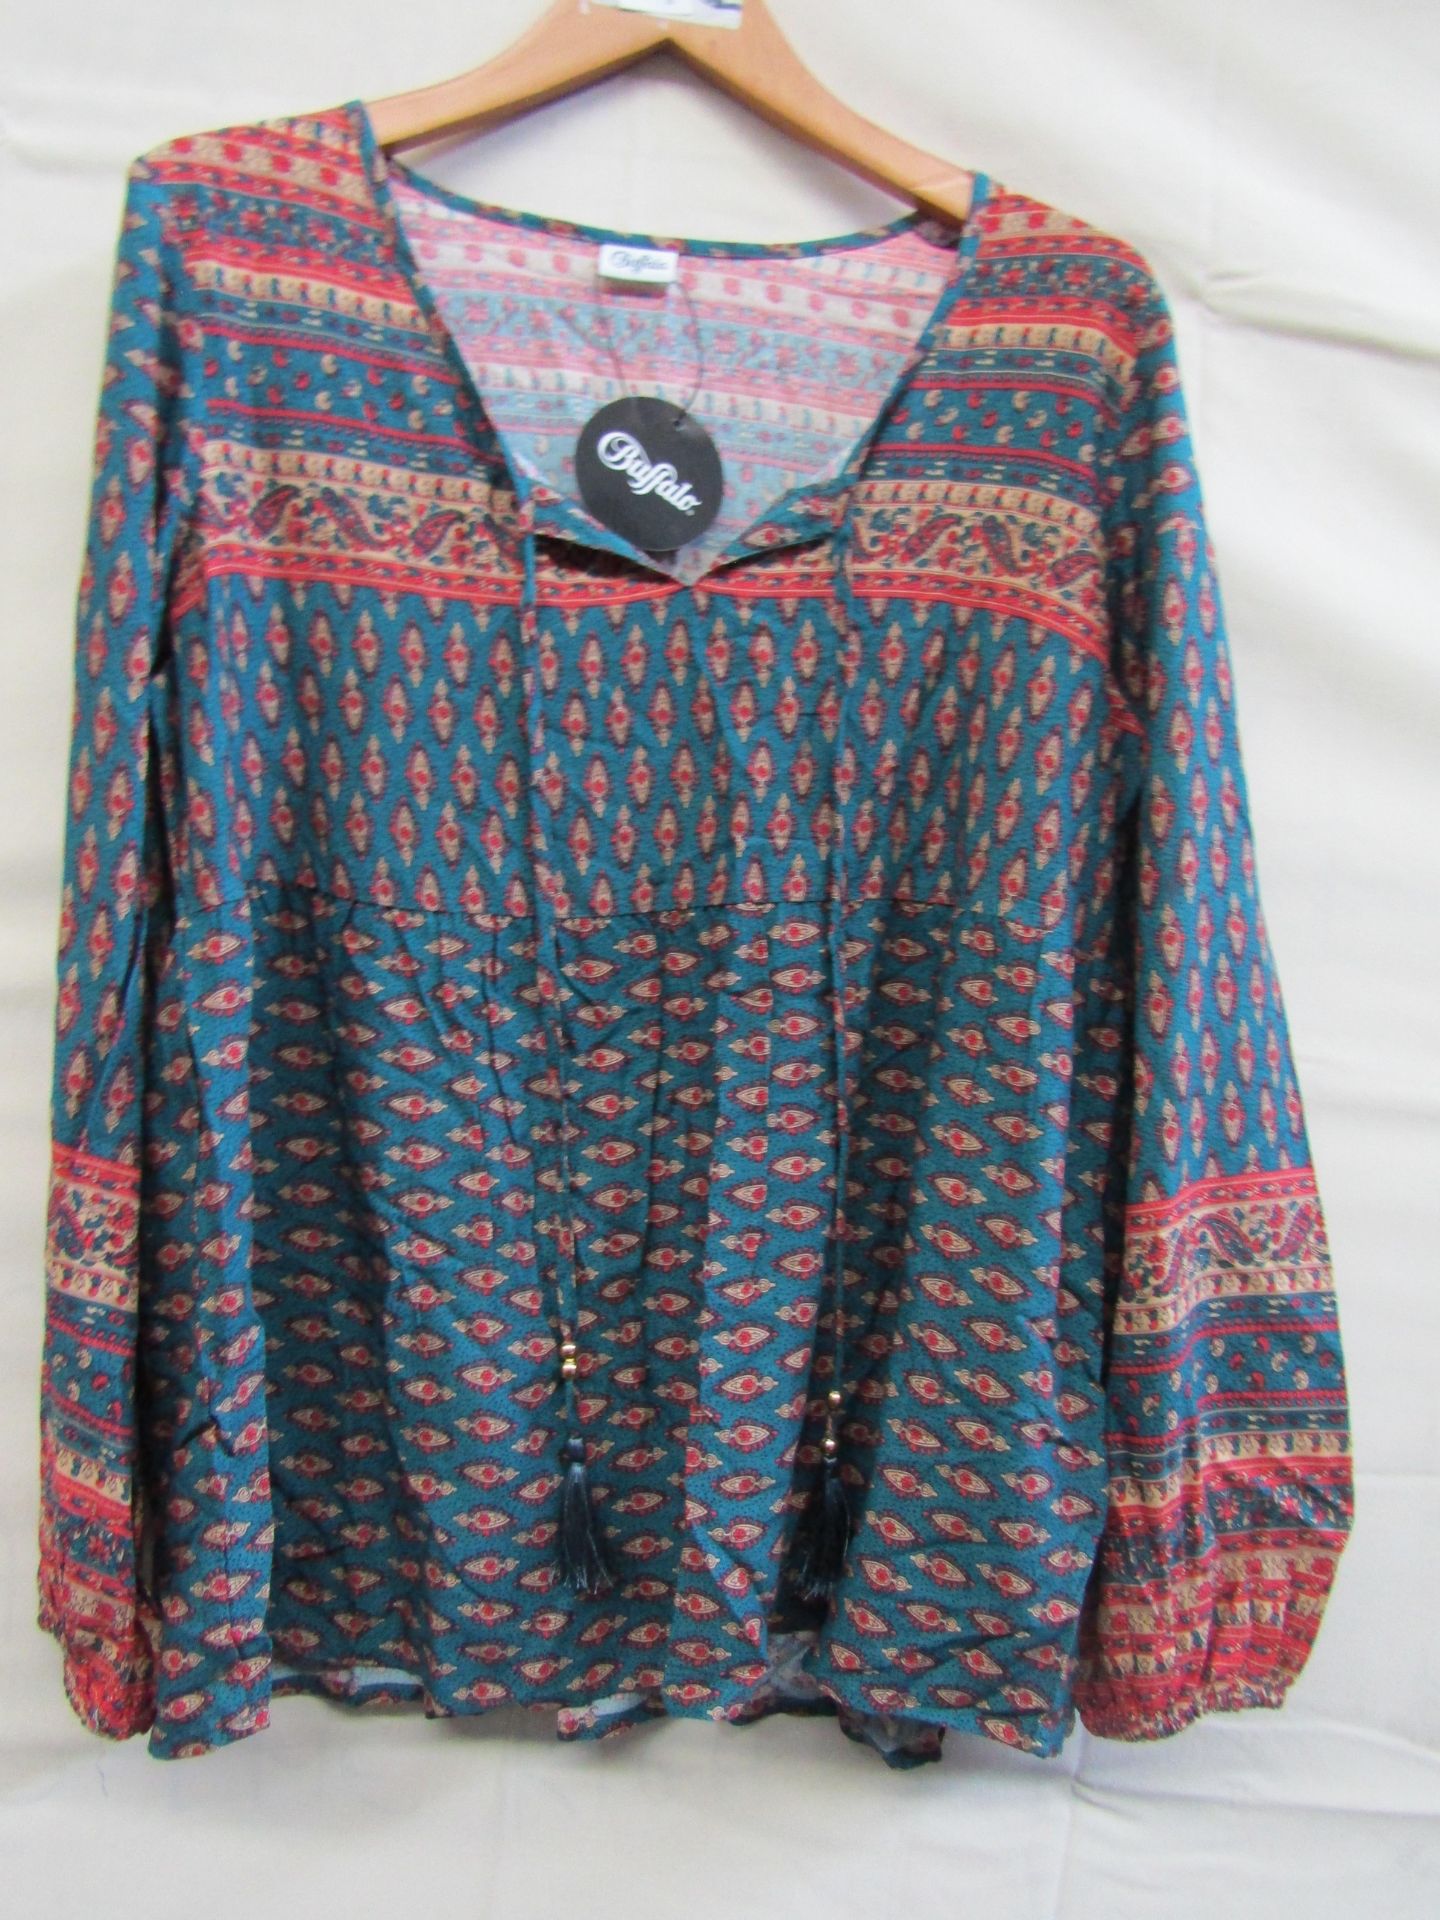 Buffalo Top Size 18 ( Has Small Mark on Sleeve Otherwize Looks Unworn With Tags